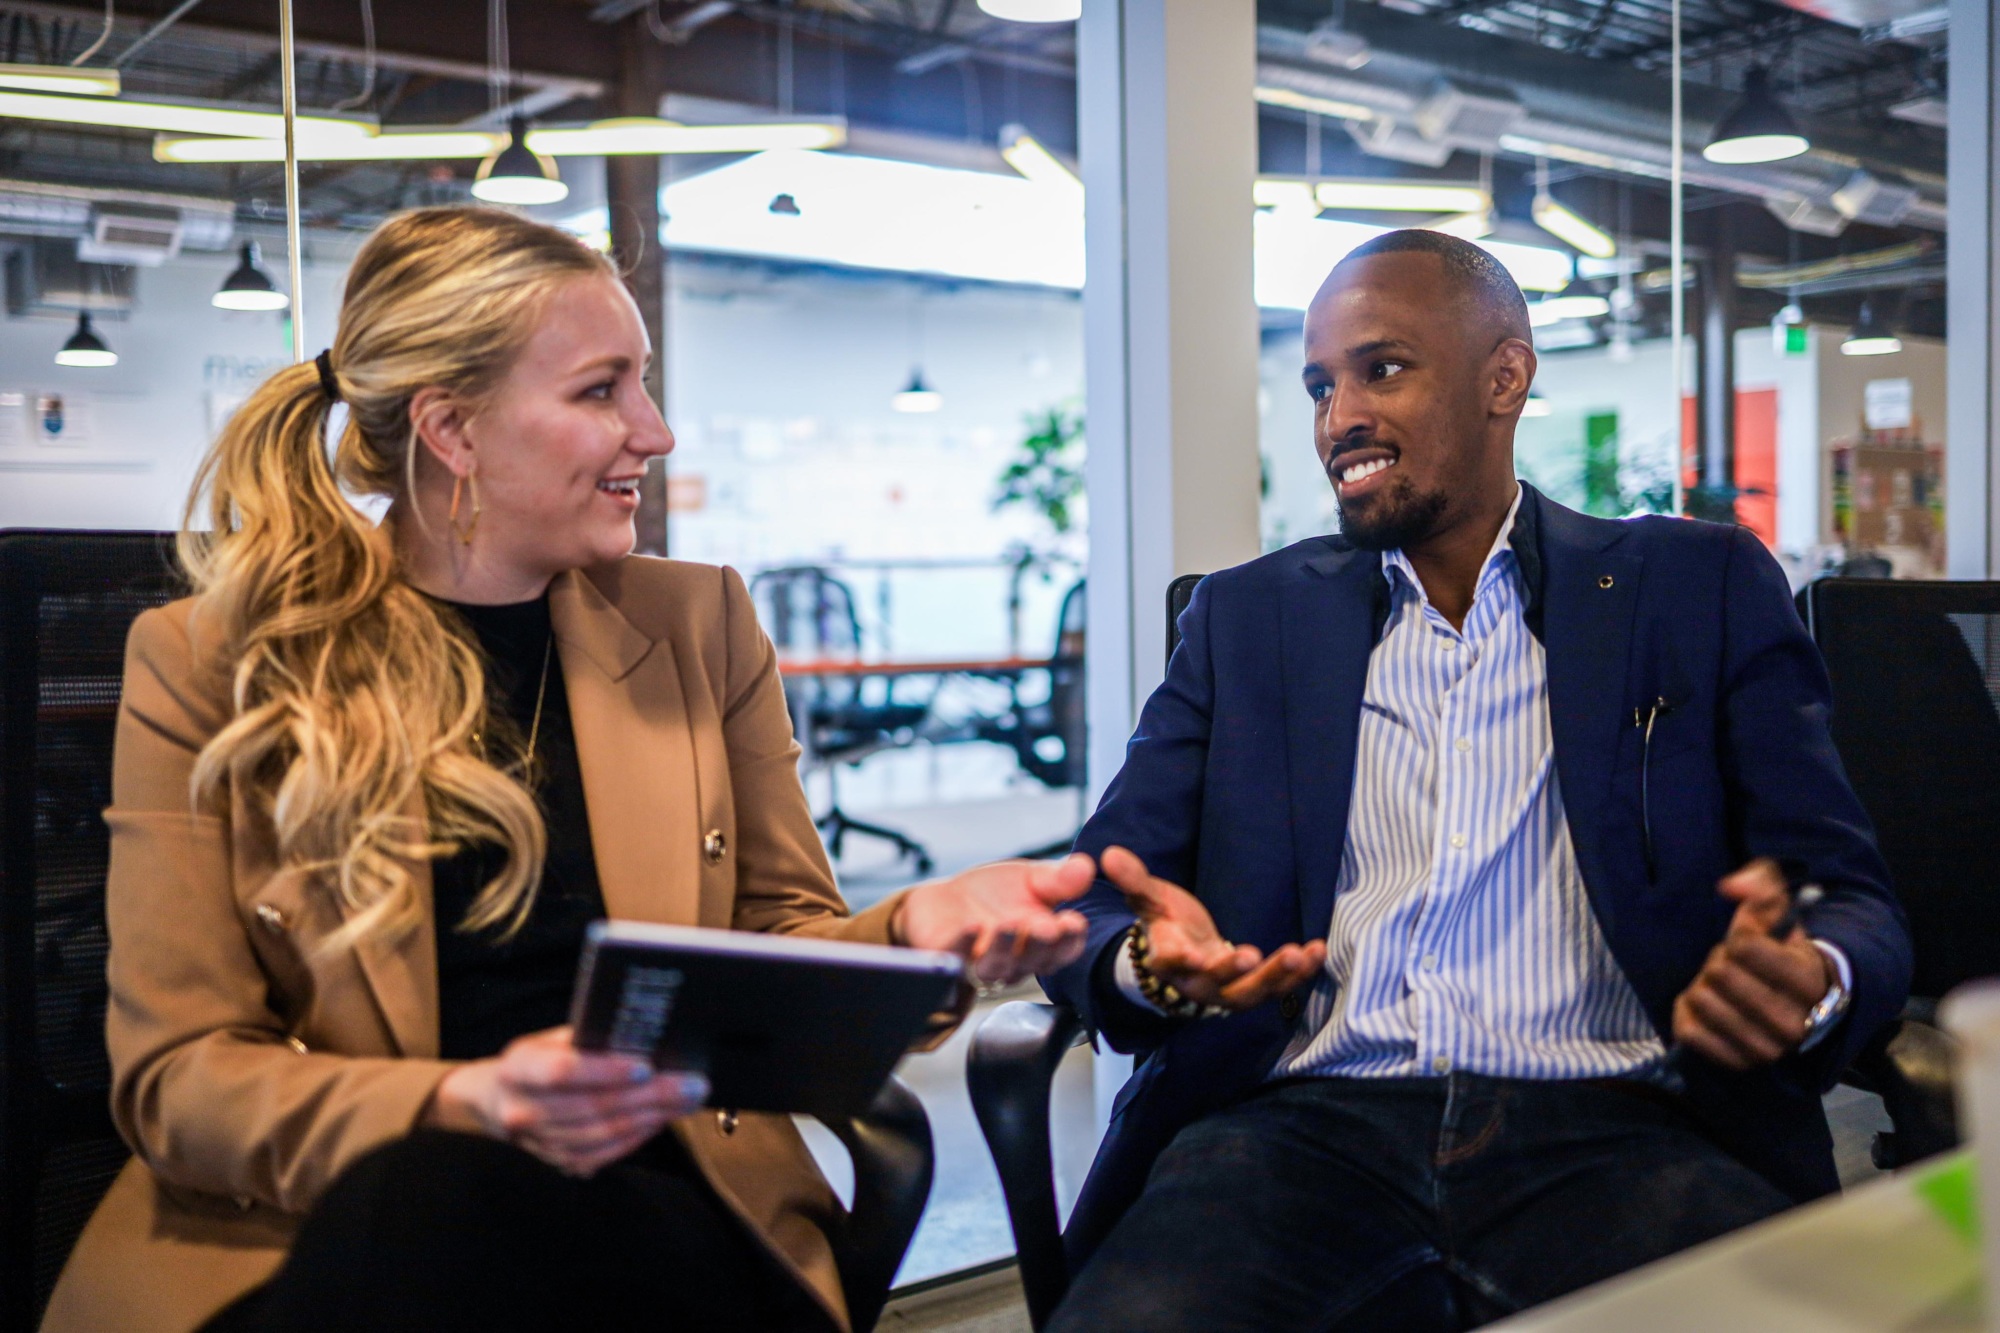 Two people - a white woman and a black man - meet in their office, both looking at an iPad and talking.